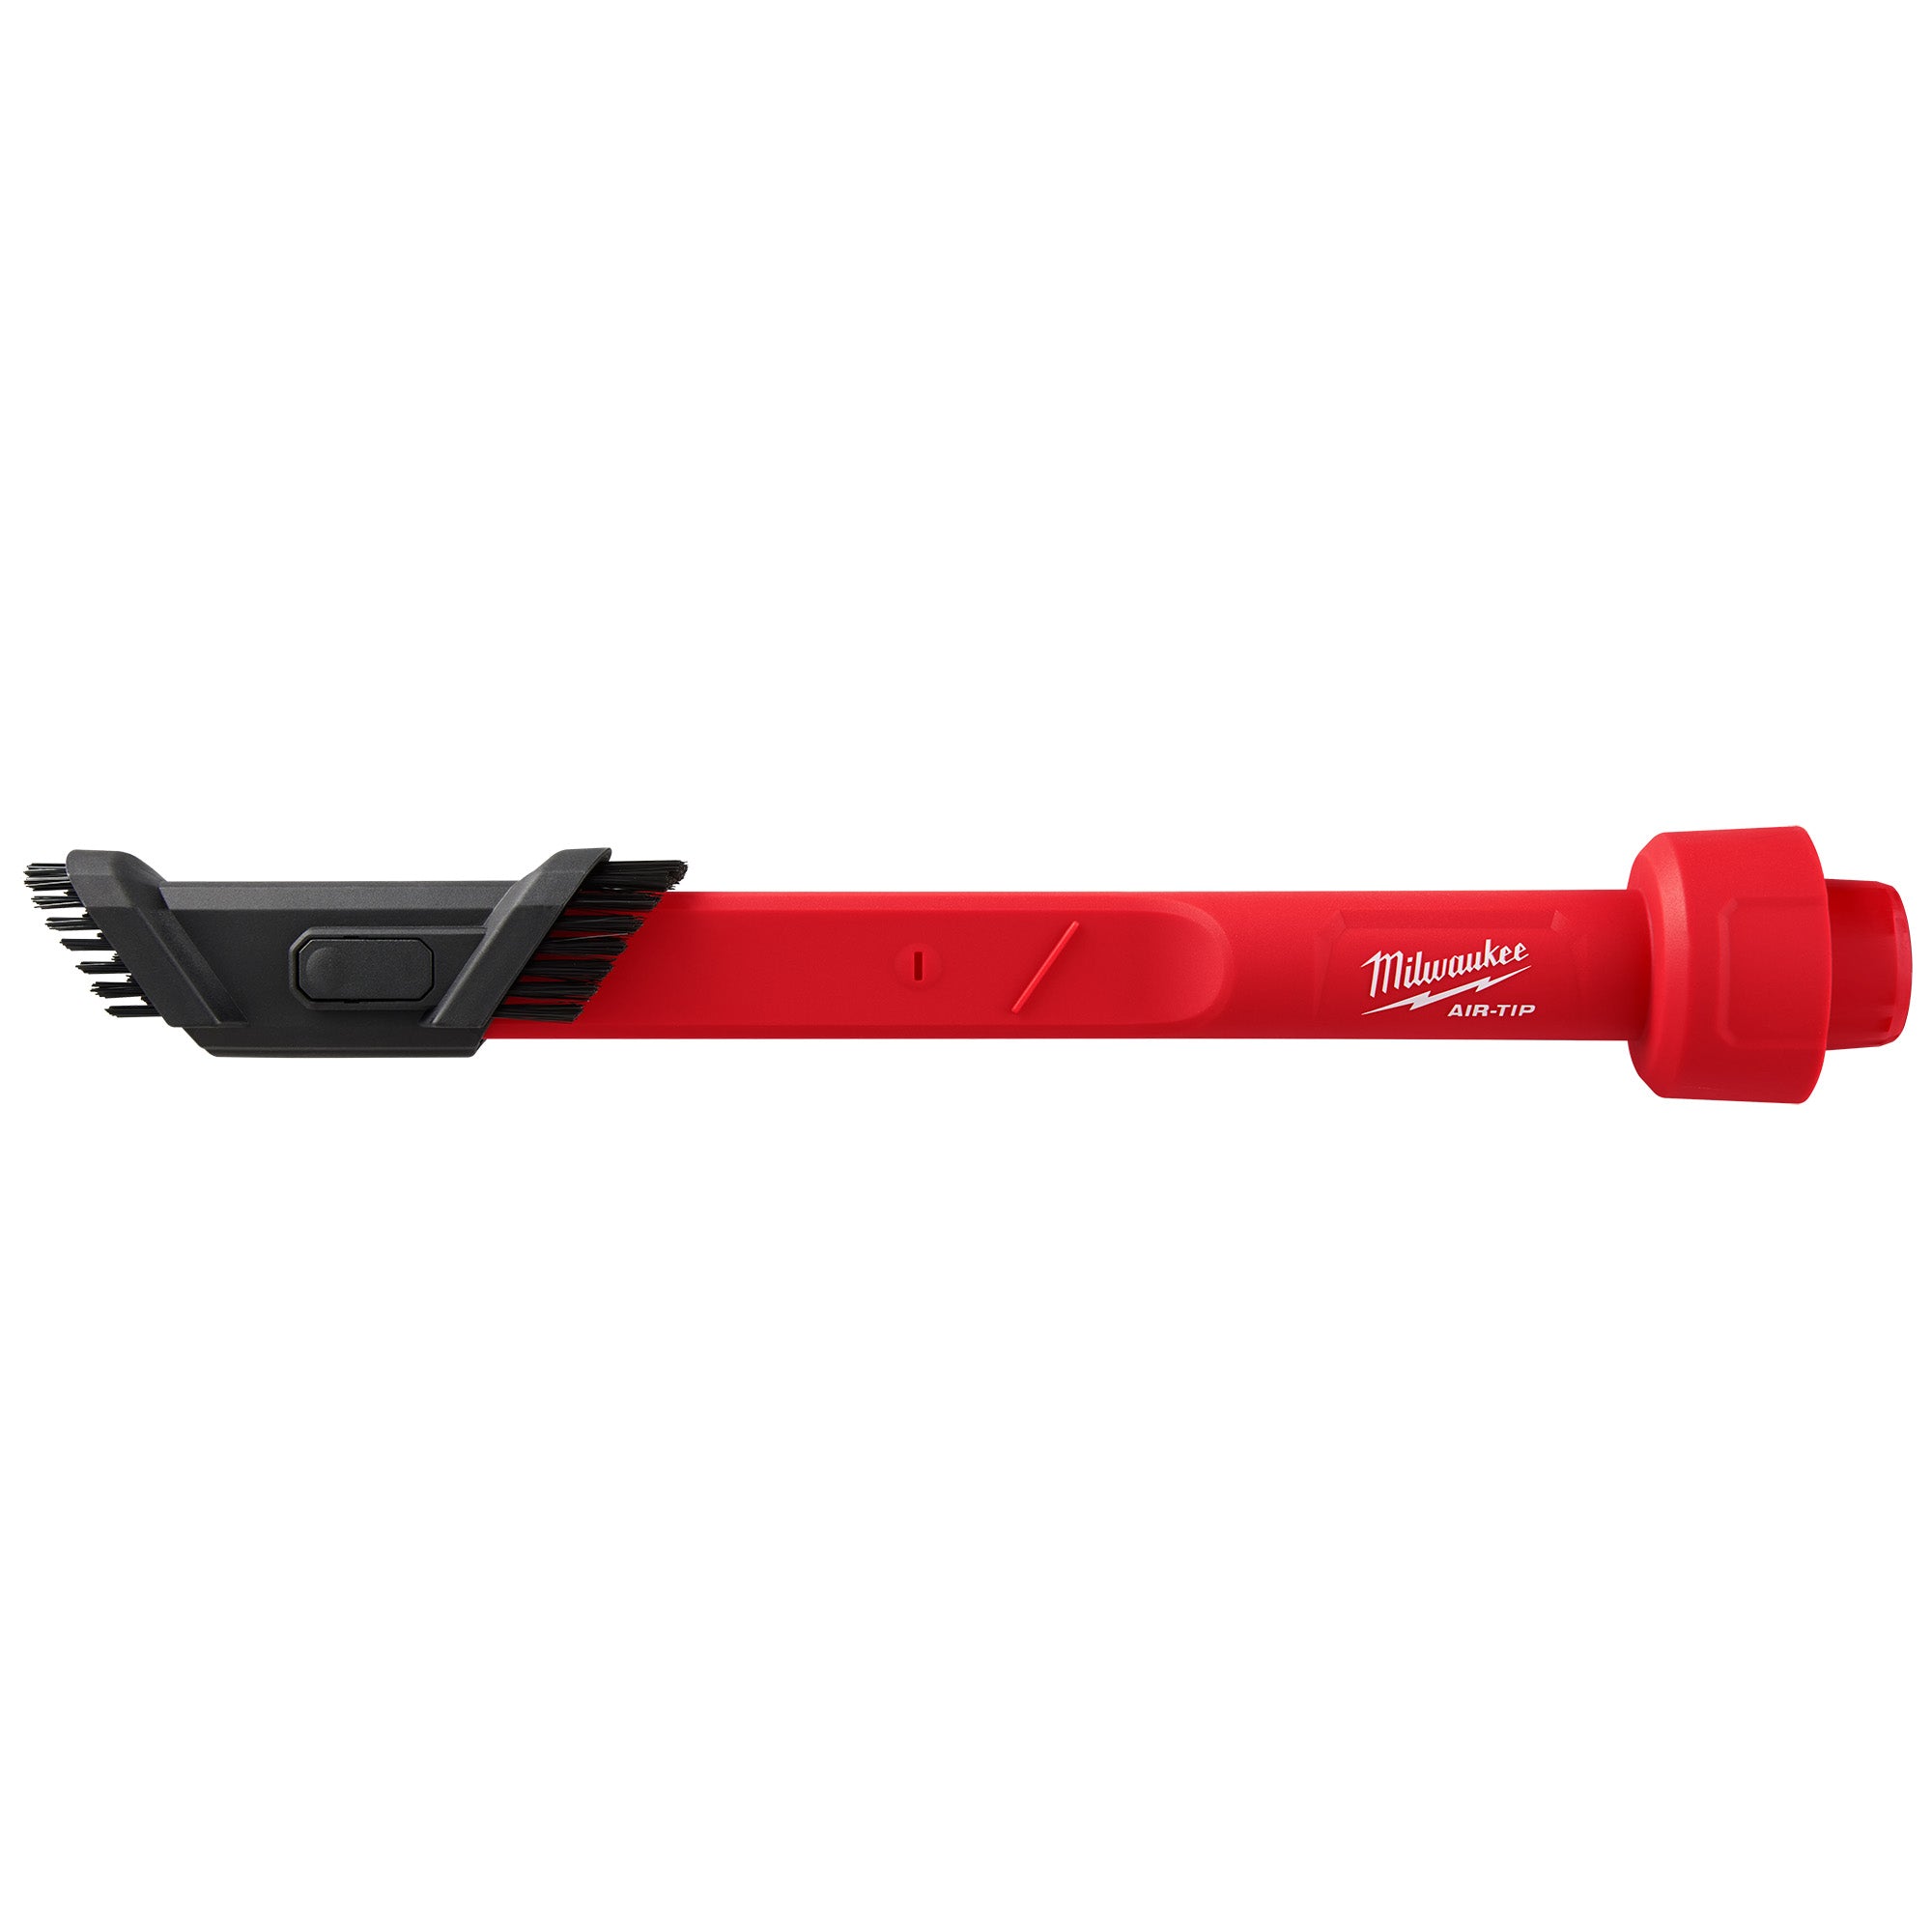 AIR-TIP 3-in-1 Crevice and Brush Tool